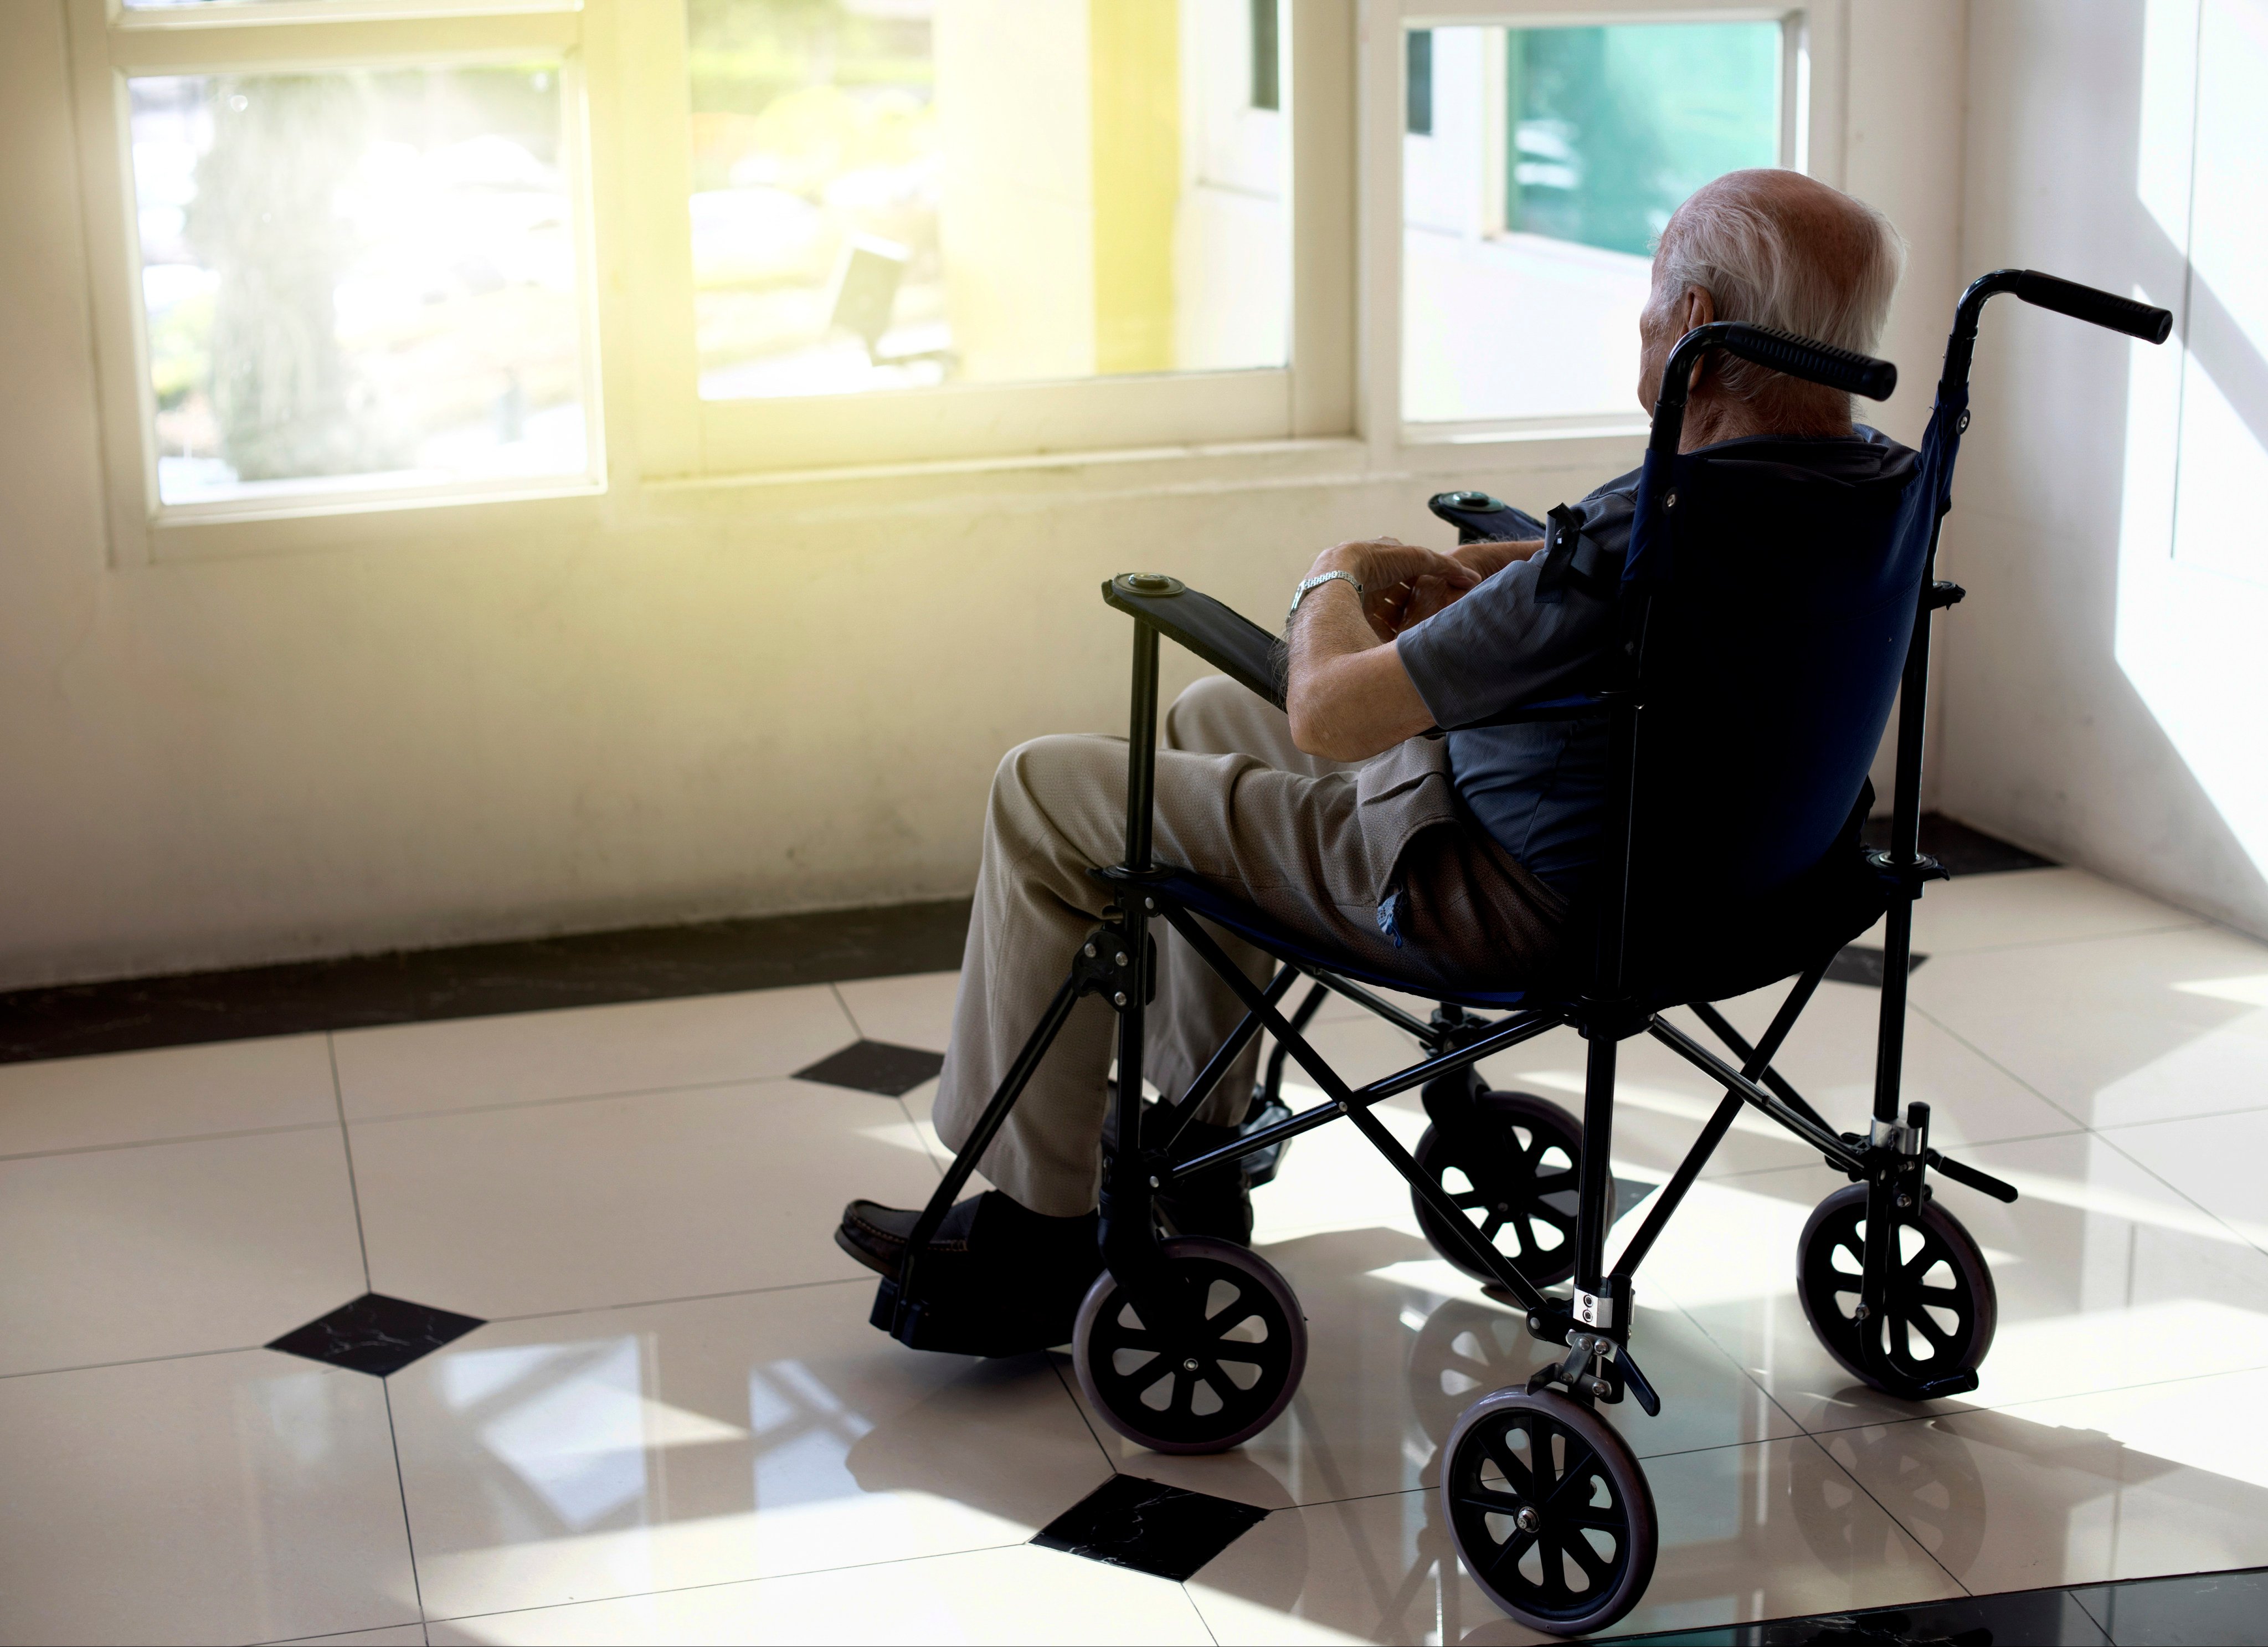 The number of dementia patients treated at Hong Kong public hospitals increased from 72,900 in 2018 to 84,100 in 2022. Photo: Shutterstock